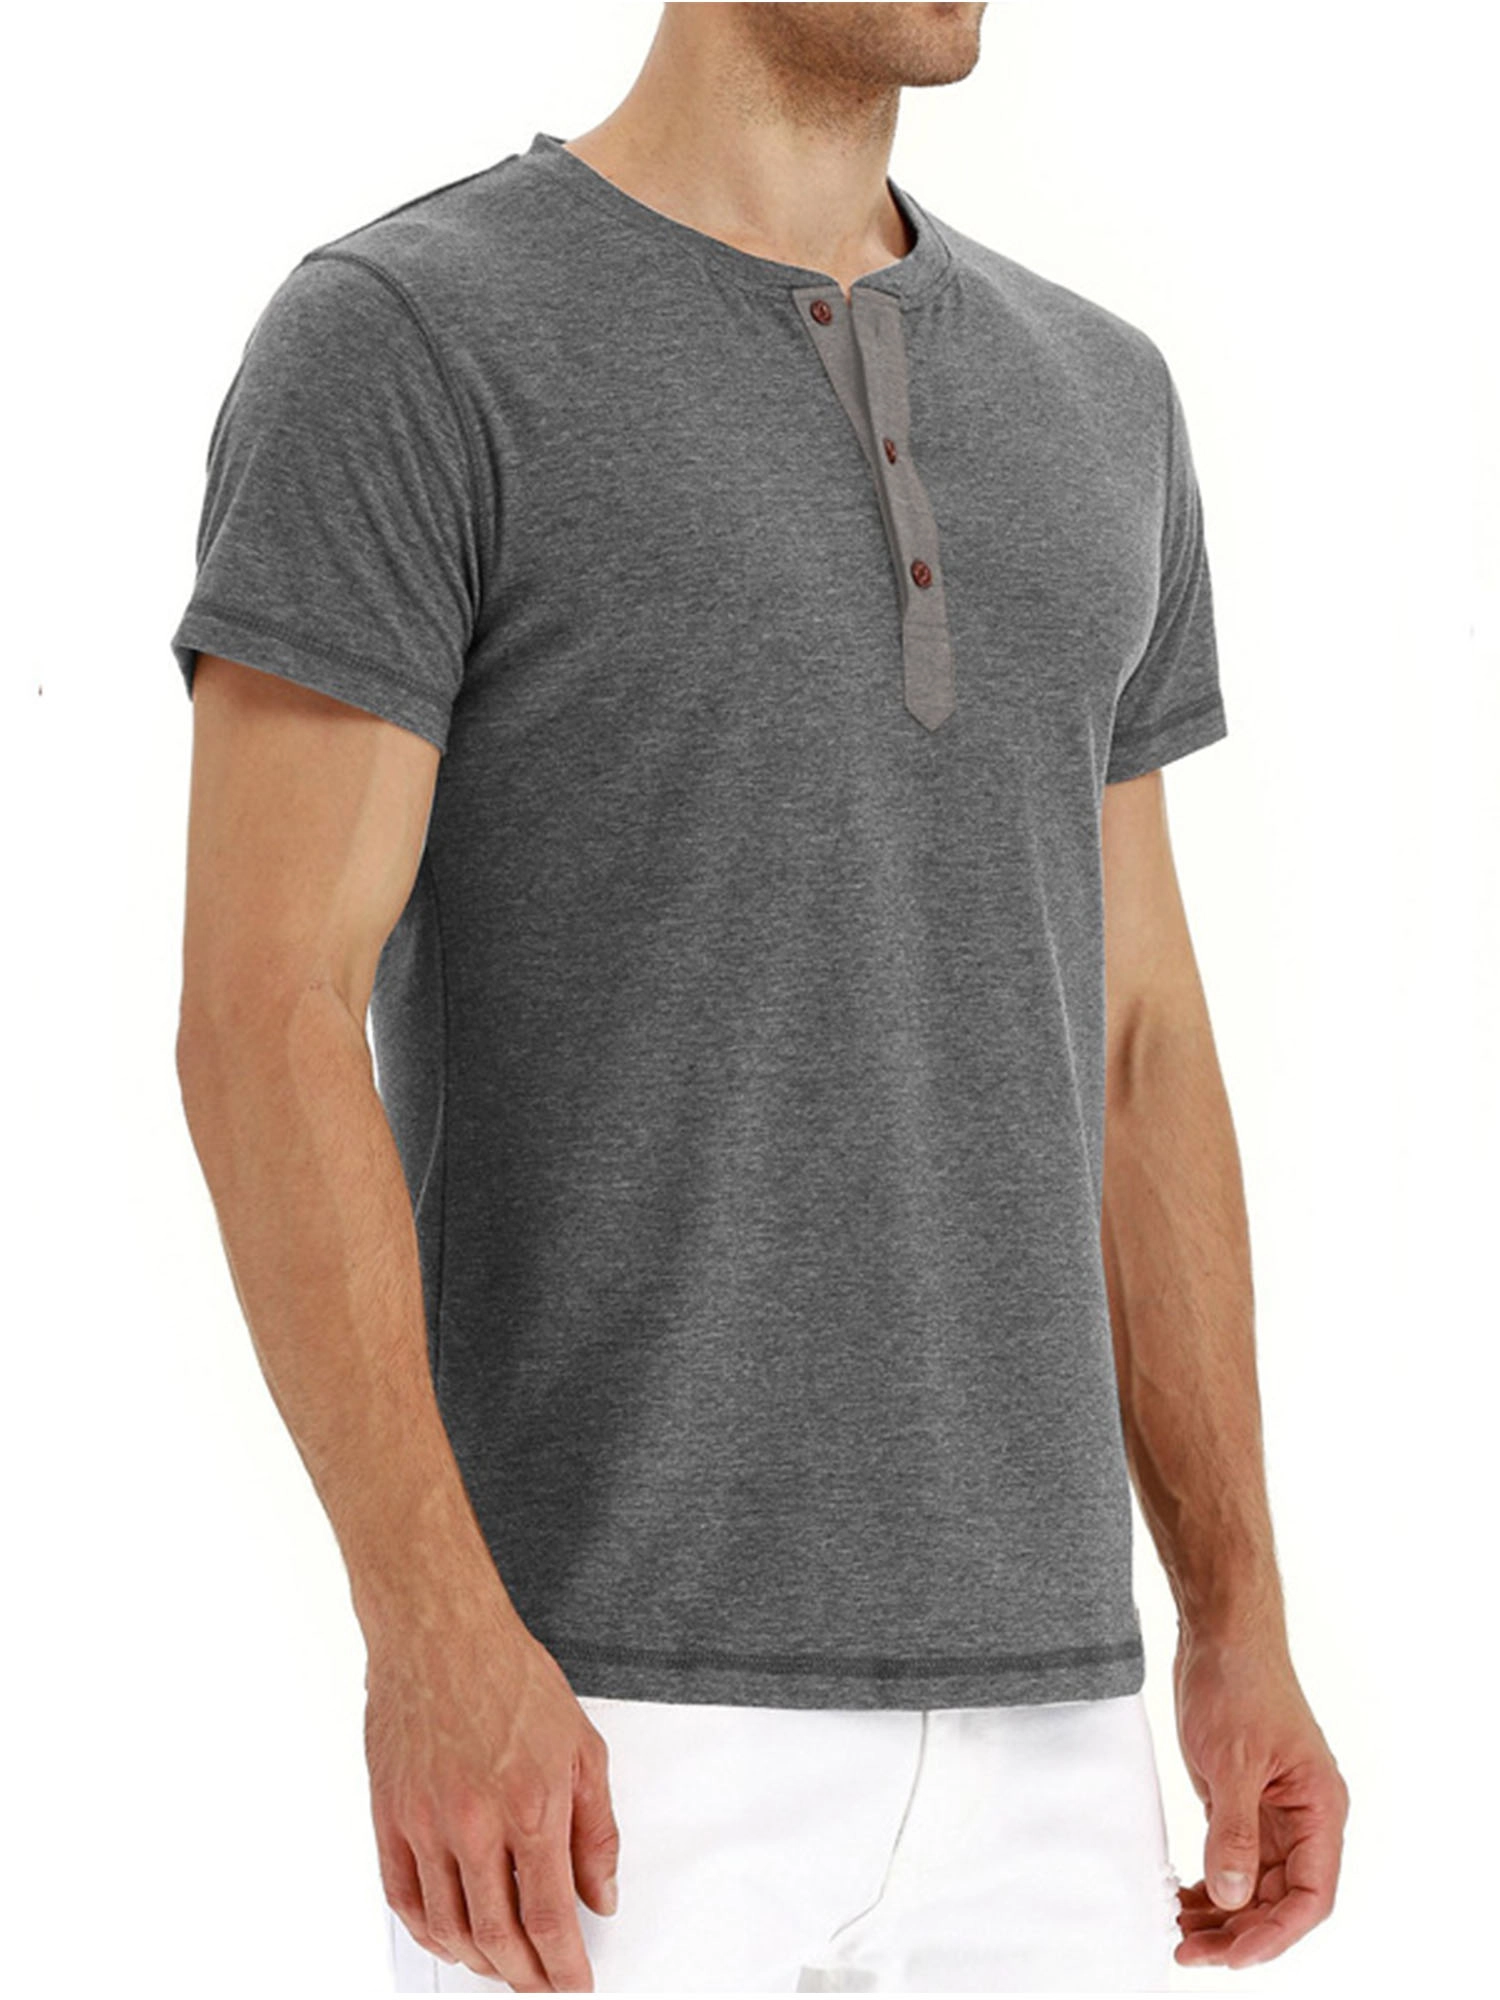 Men's Henley Shirts Buttons Short Sleeve Casual Tops Slim Fit T Shirts Men Casual Tee Blouse